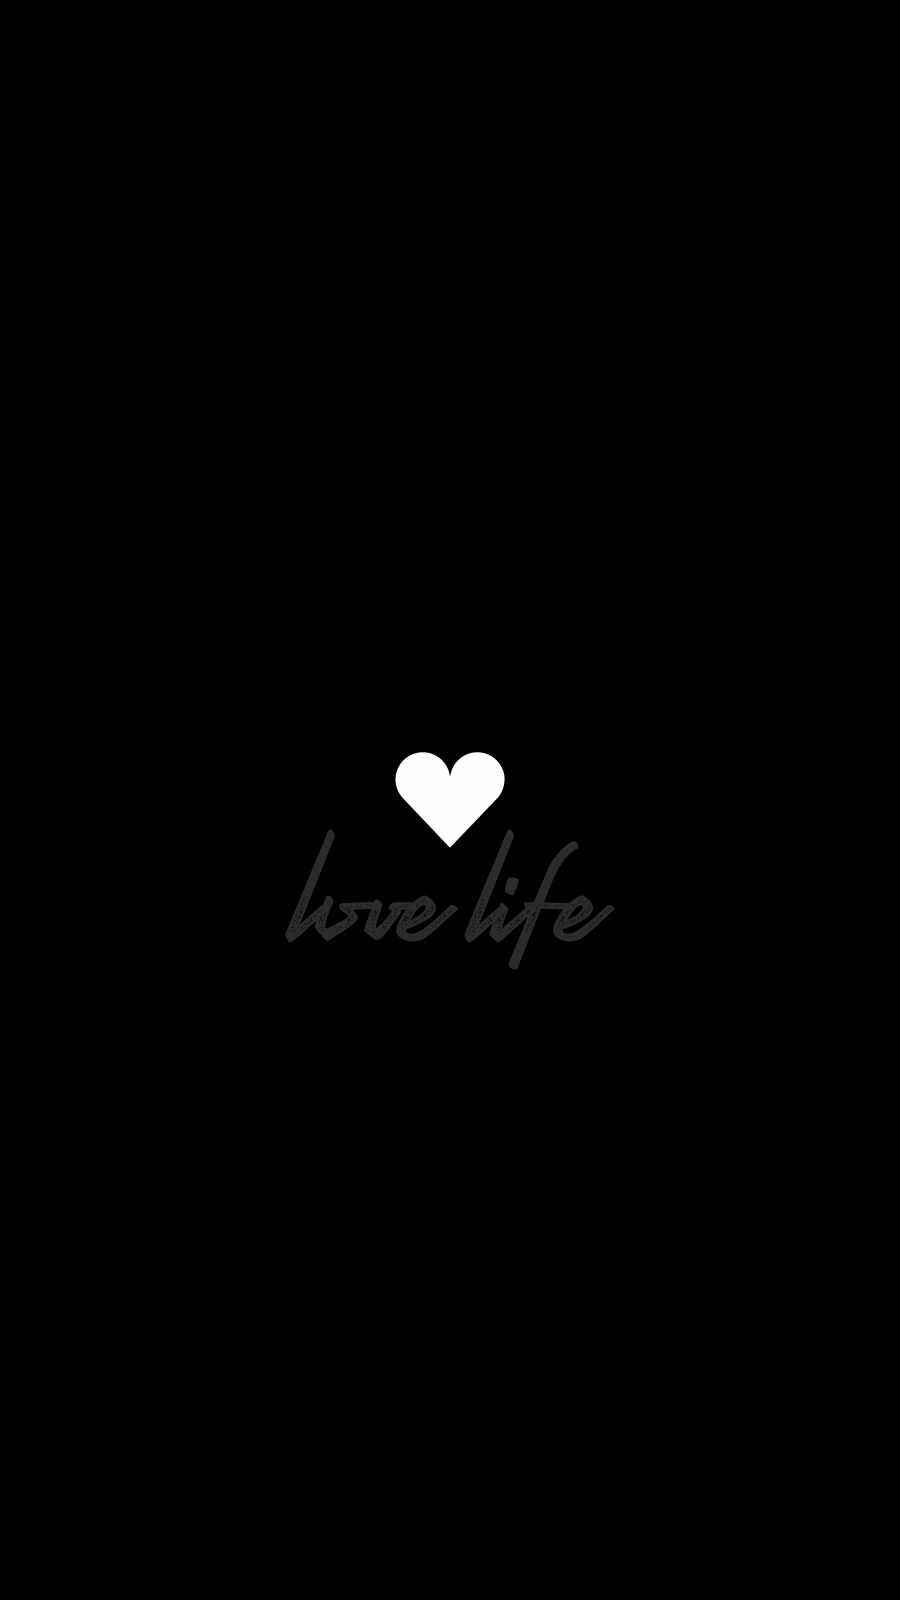 Love Life IPhone Wallpaper - IPhone Wallpapers : iPhone Wallpapers